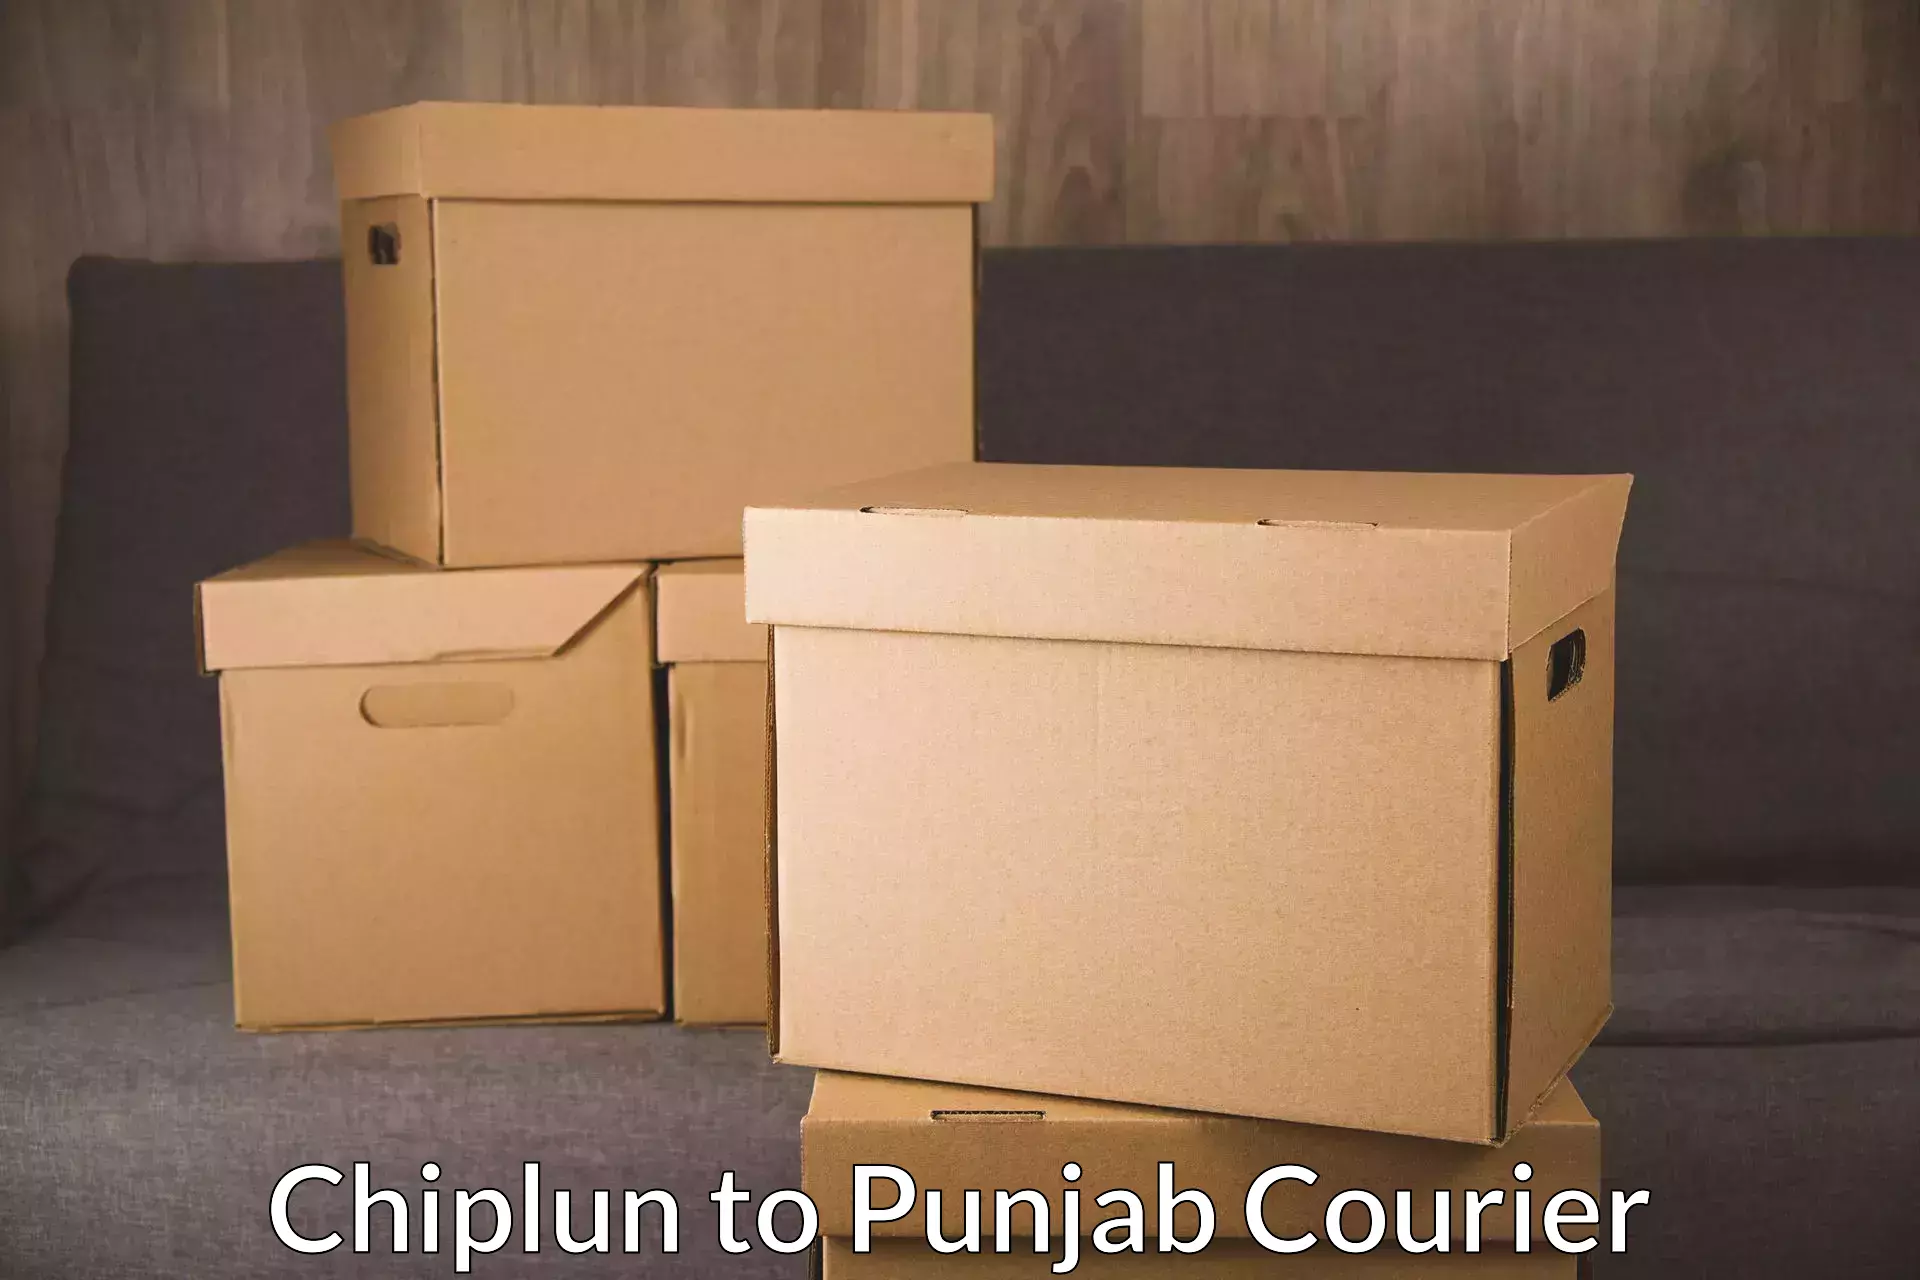 Express delivery network Chiplun to Amritsar